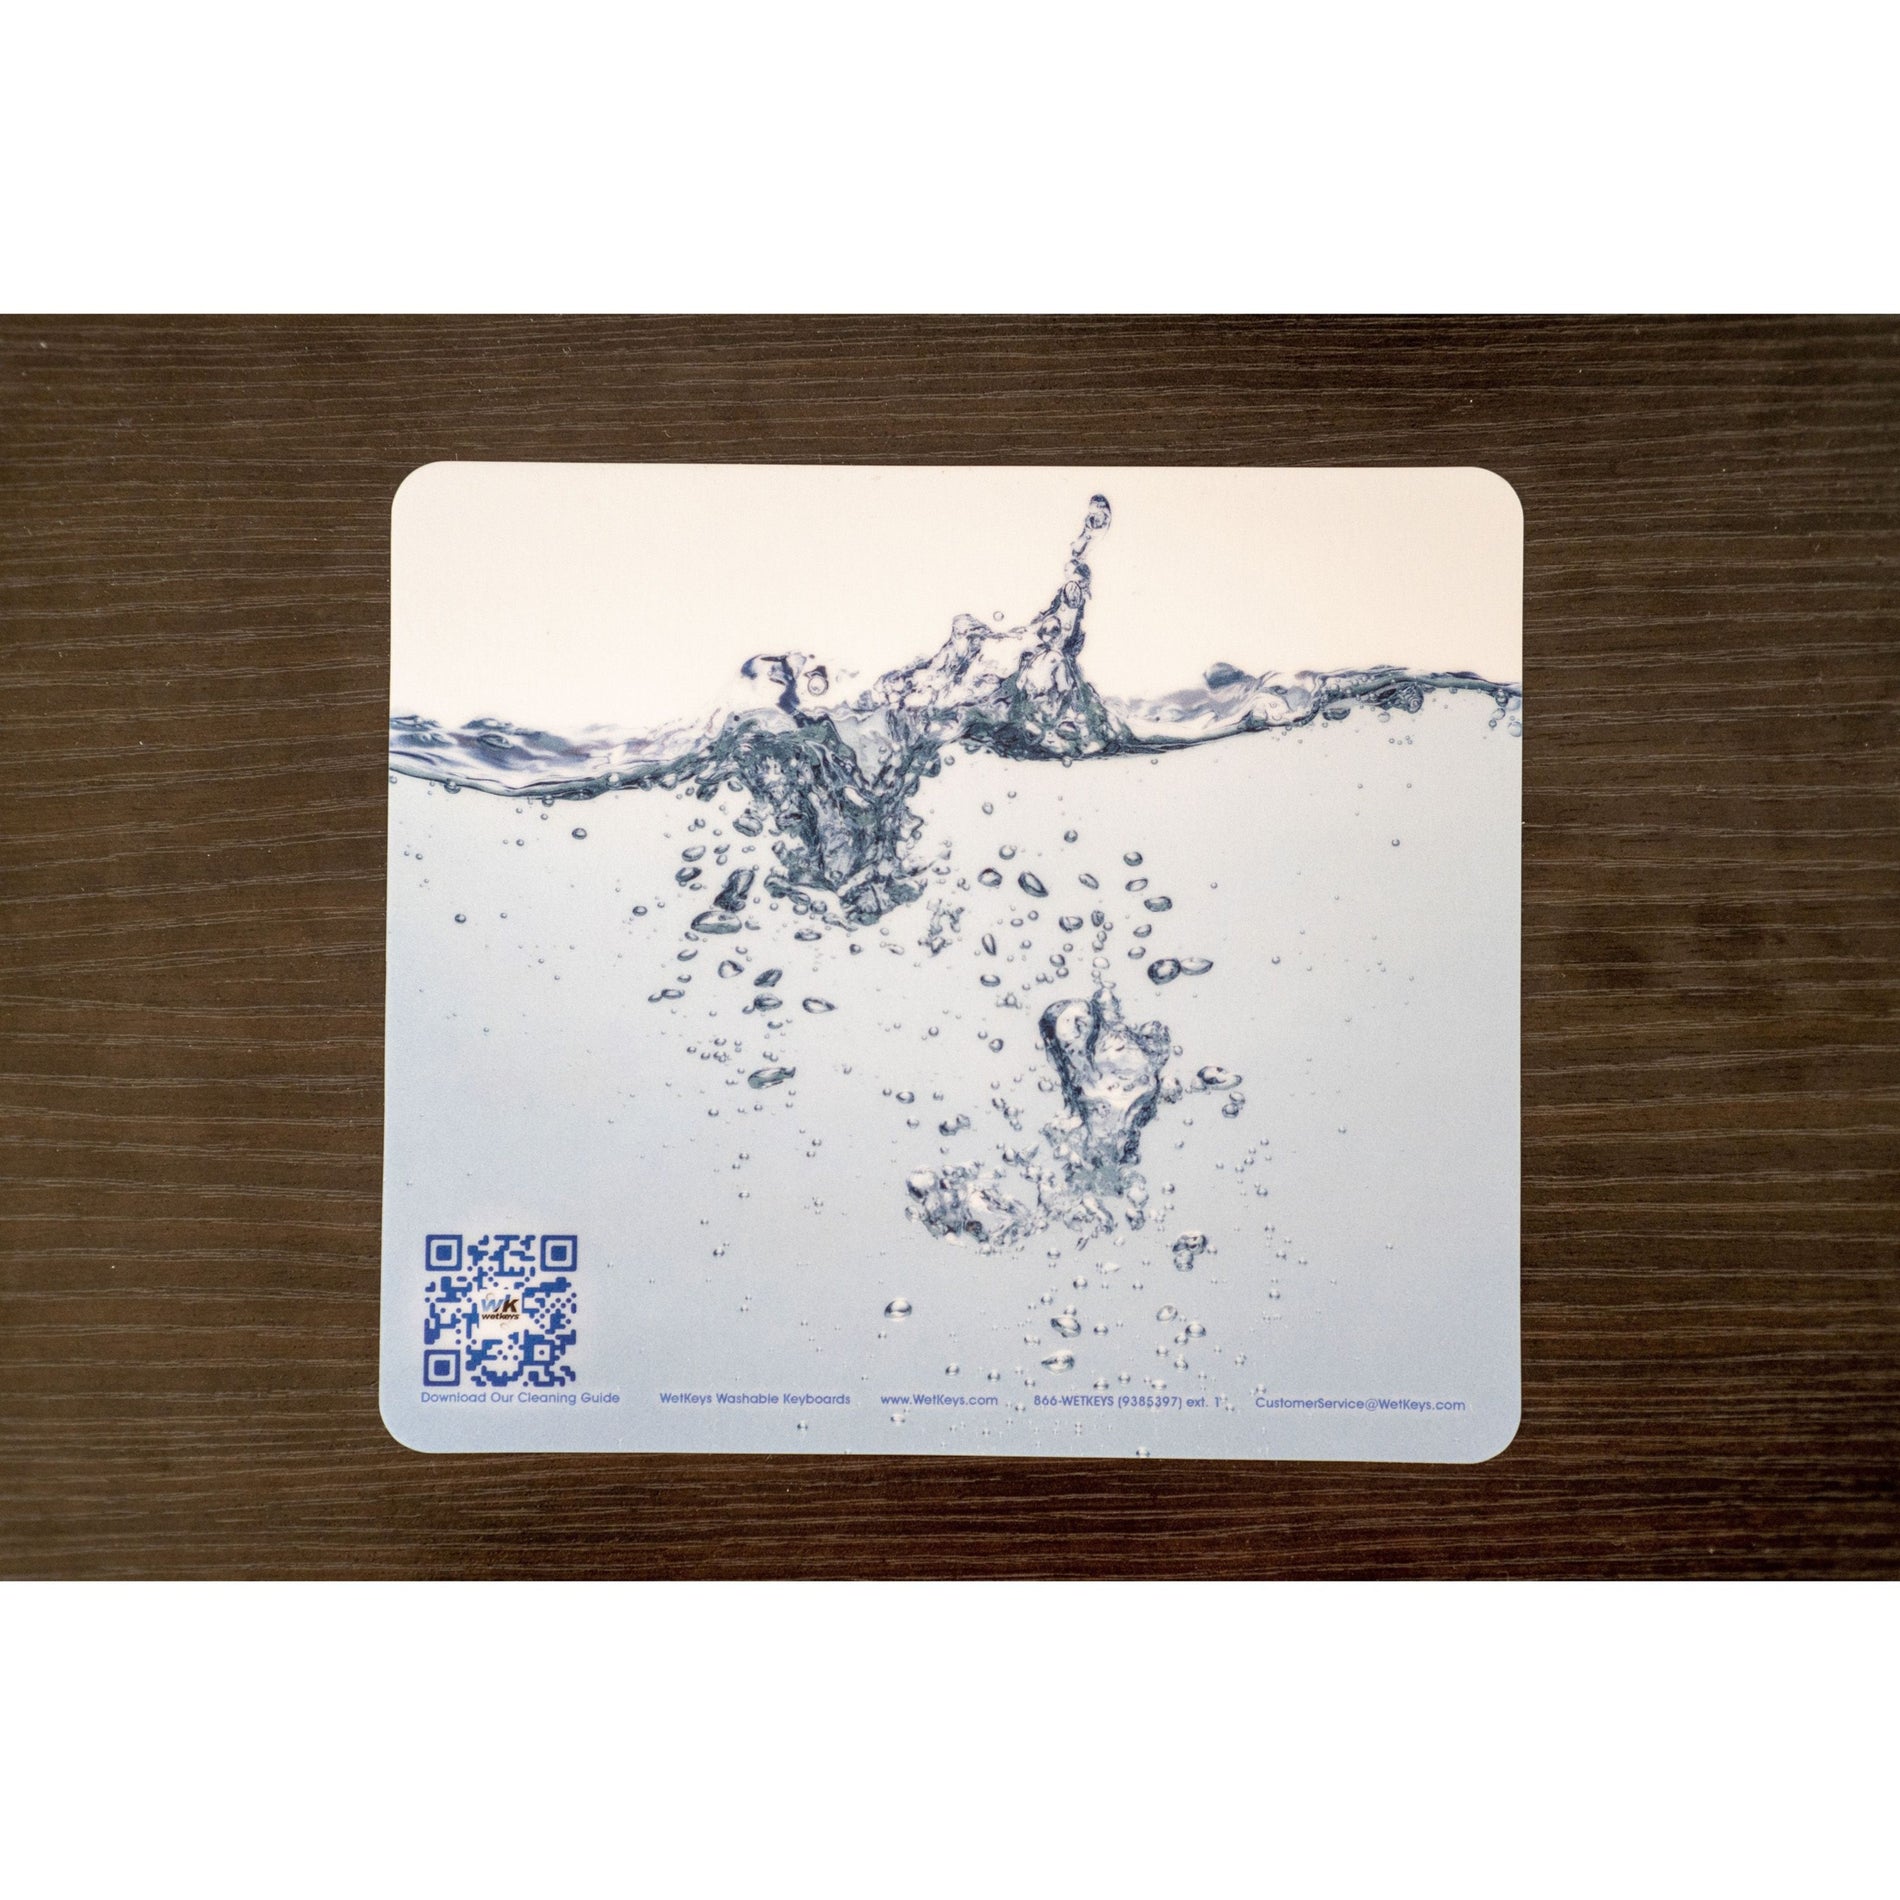 WetKeys Washable Keyboards MPWKR-1 Flexible Repositionable Ultra-thin Washable Mouse Pad, Anti-slip, Water Proof